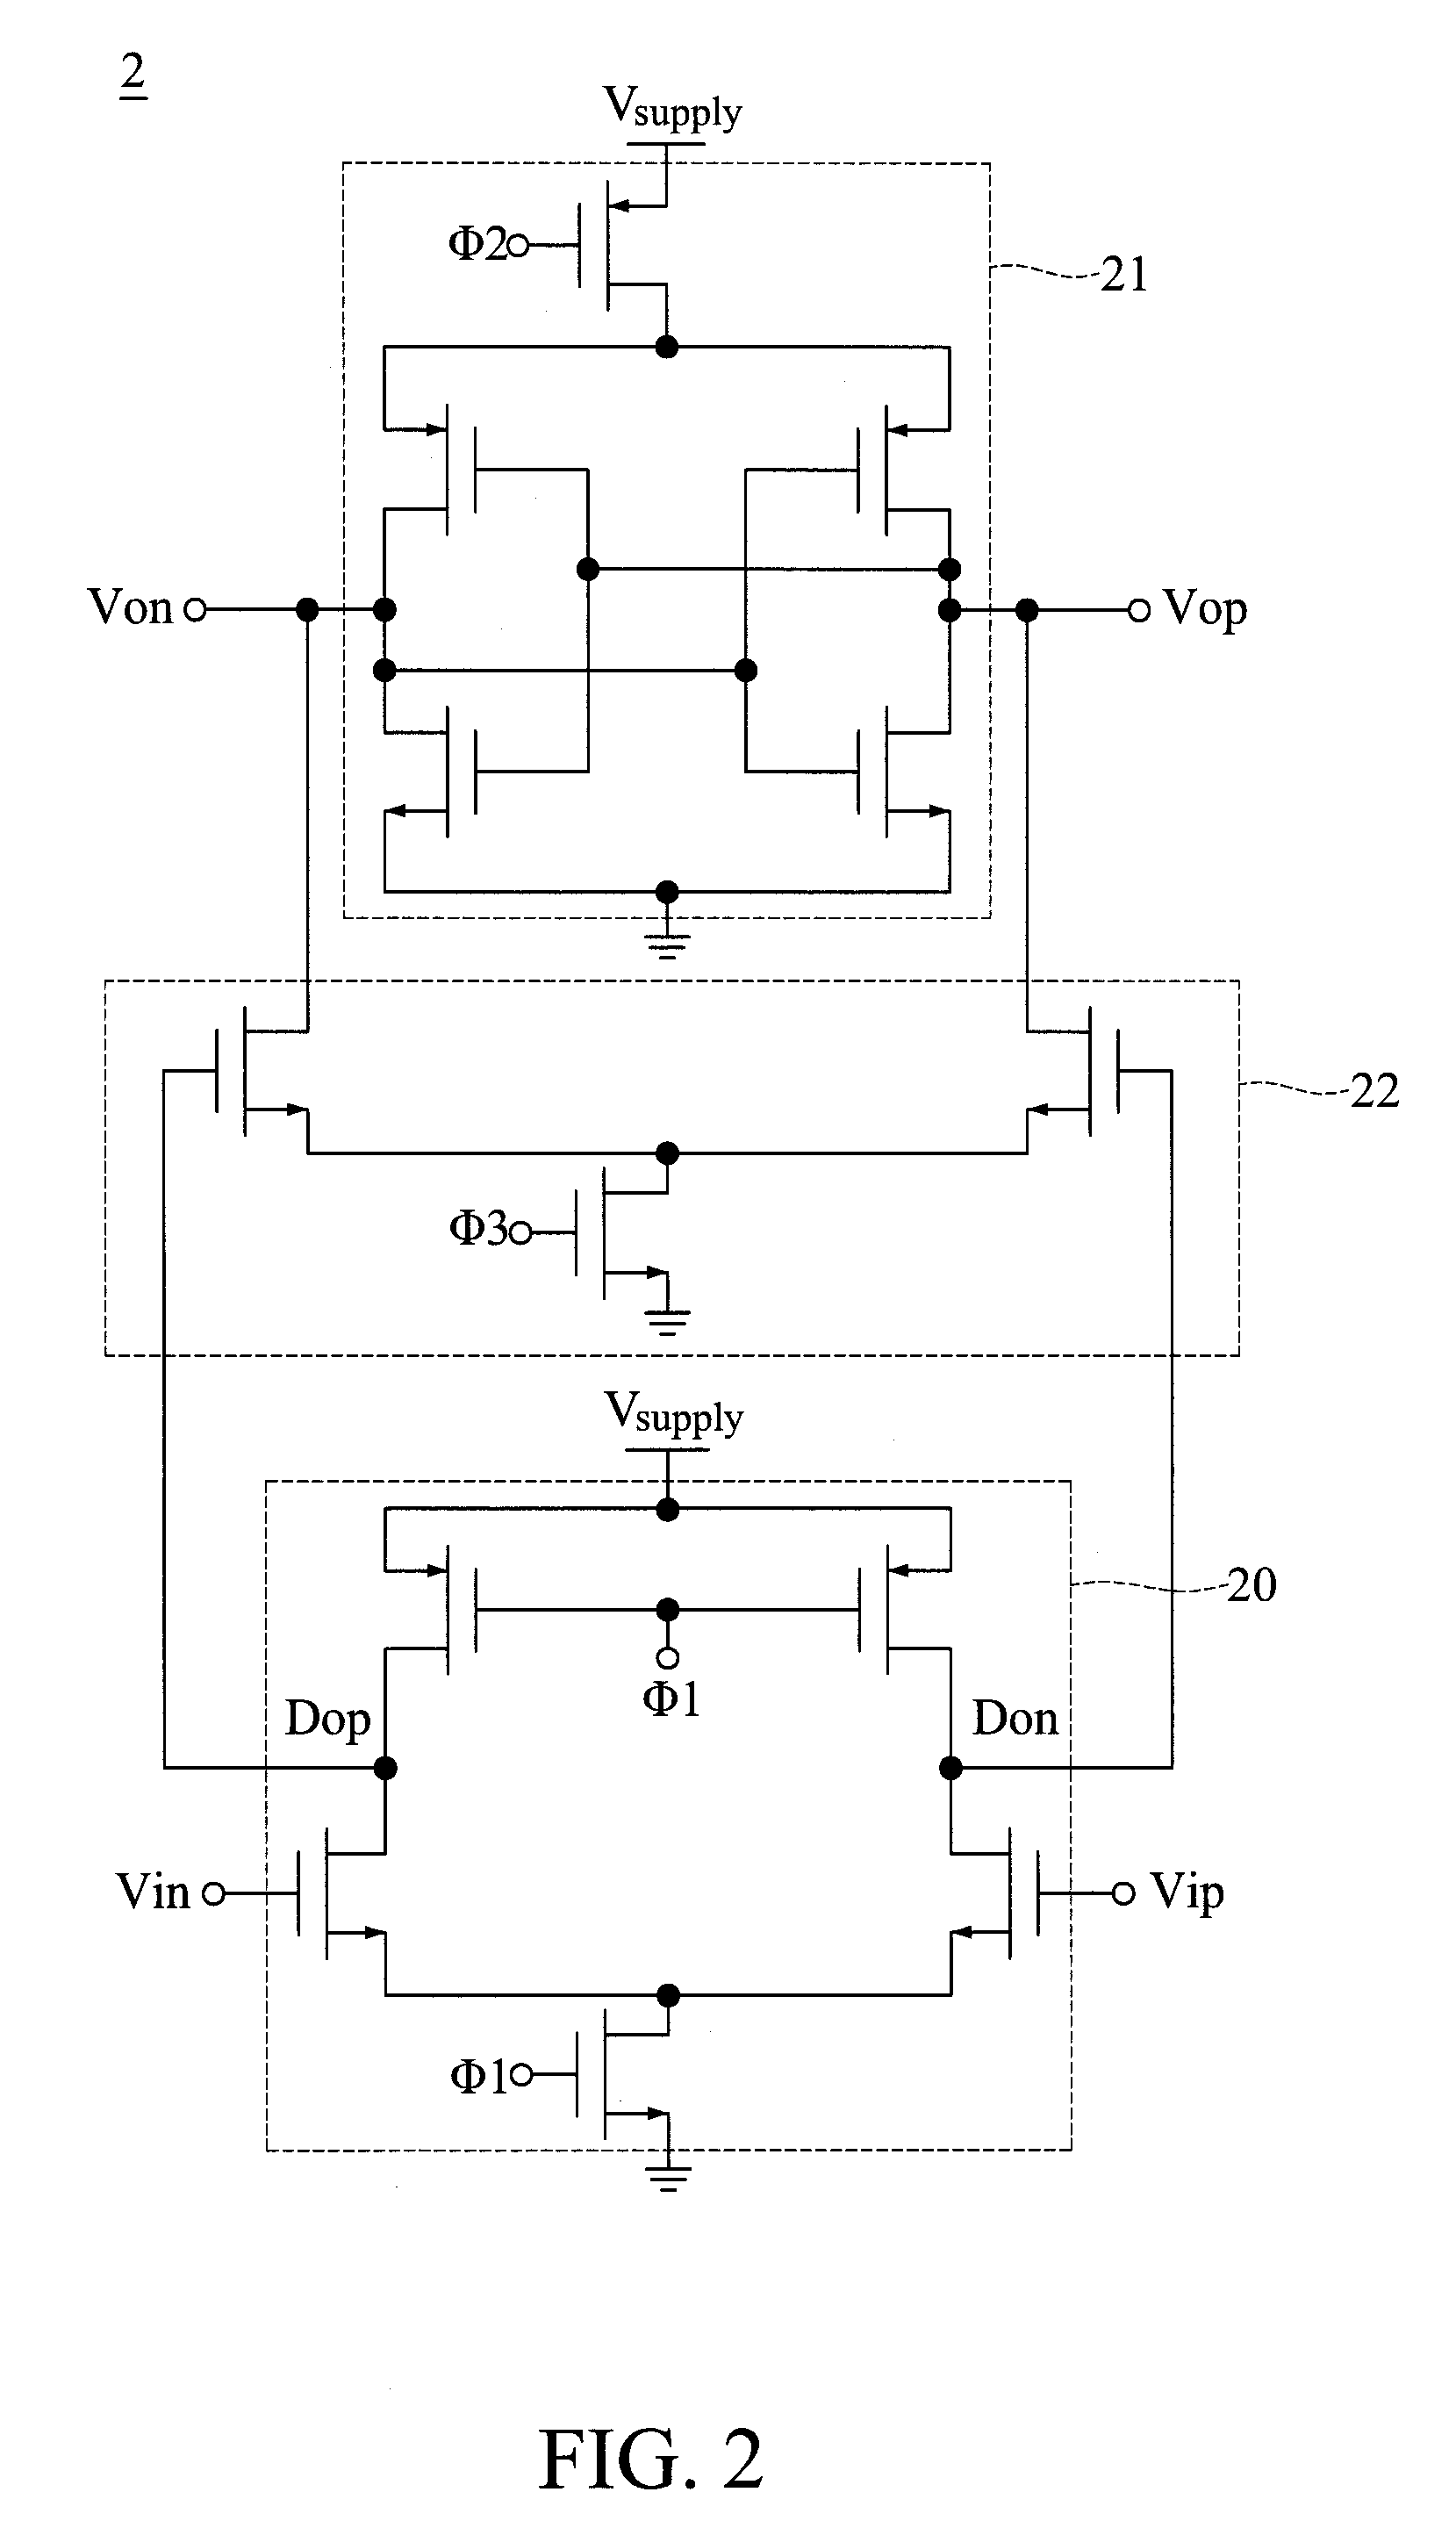 Dynamic comparator with equalization function